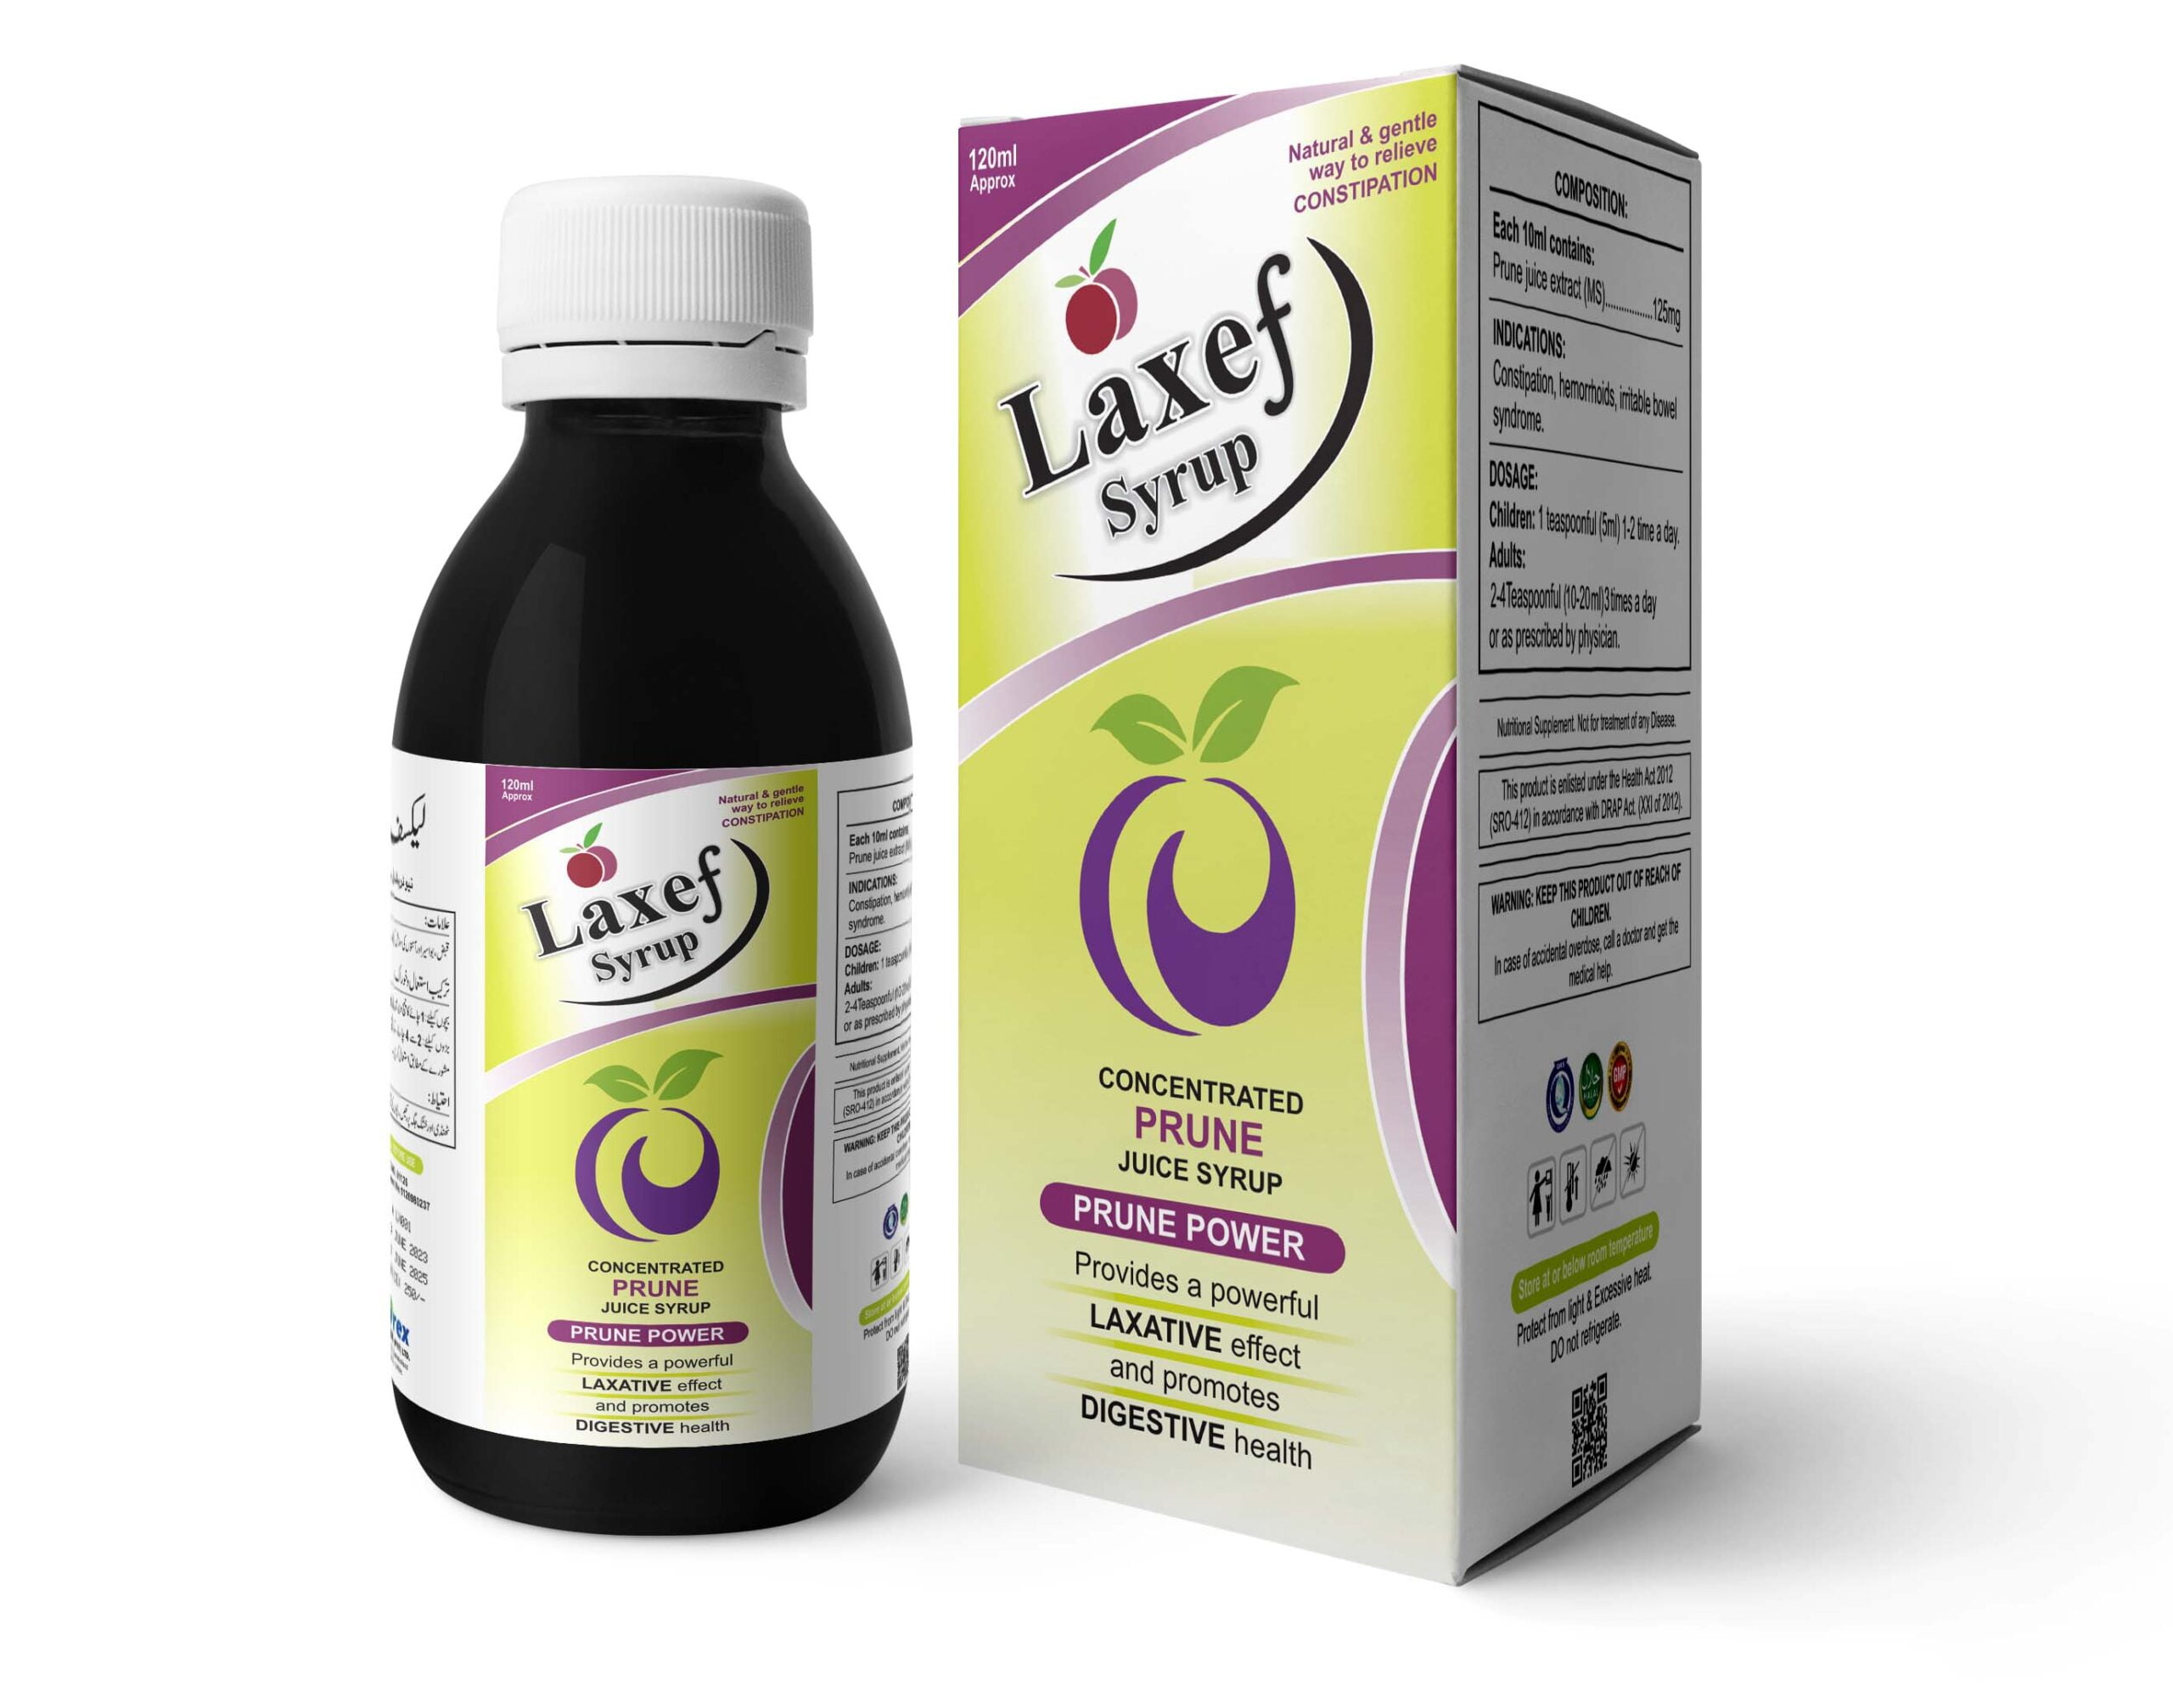 Laxef Syrup